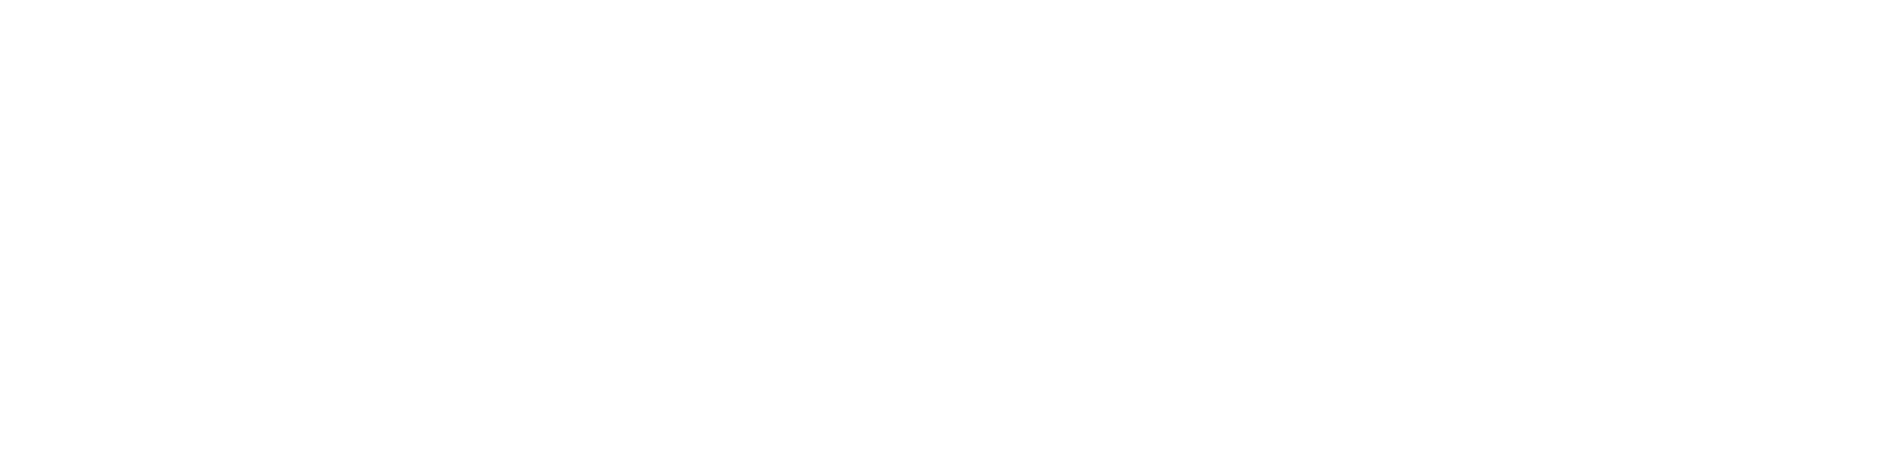 Sustainable Equity Partners Ltd